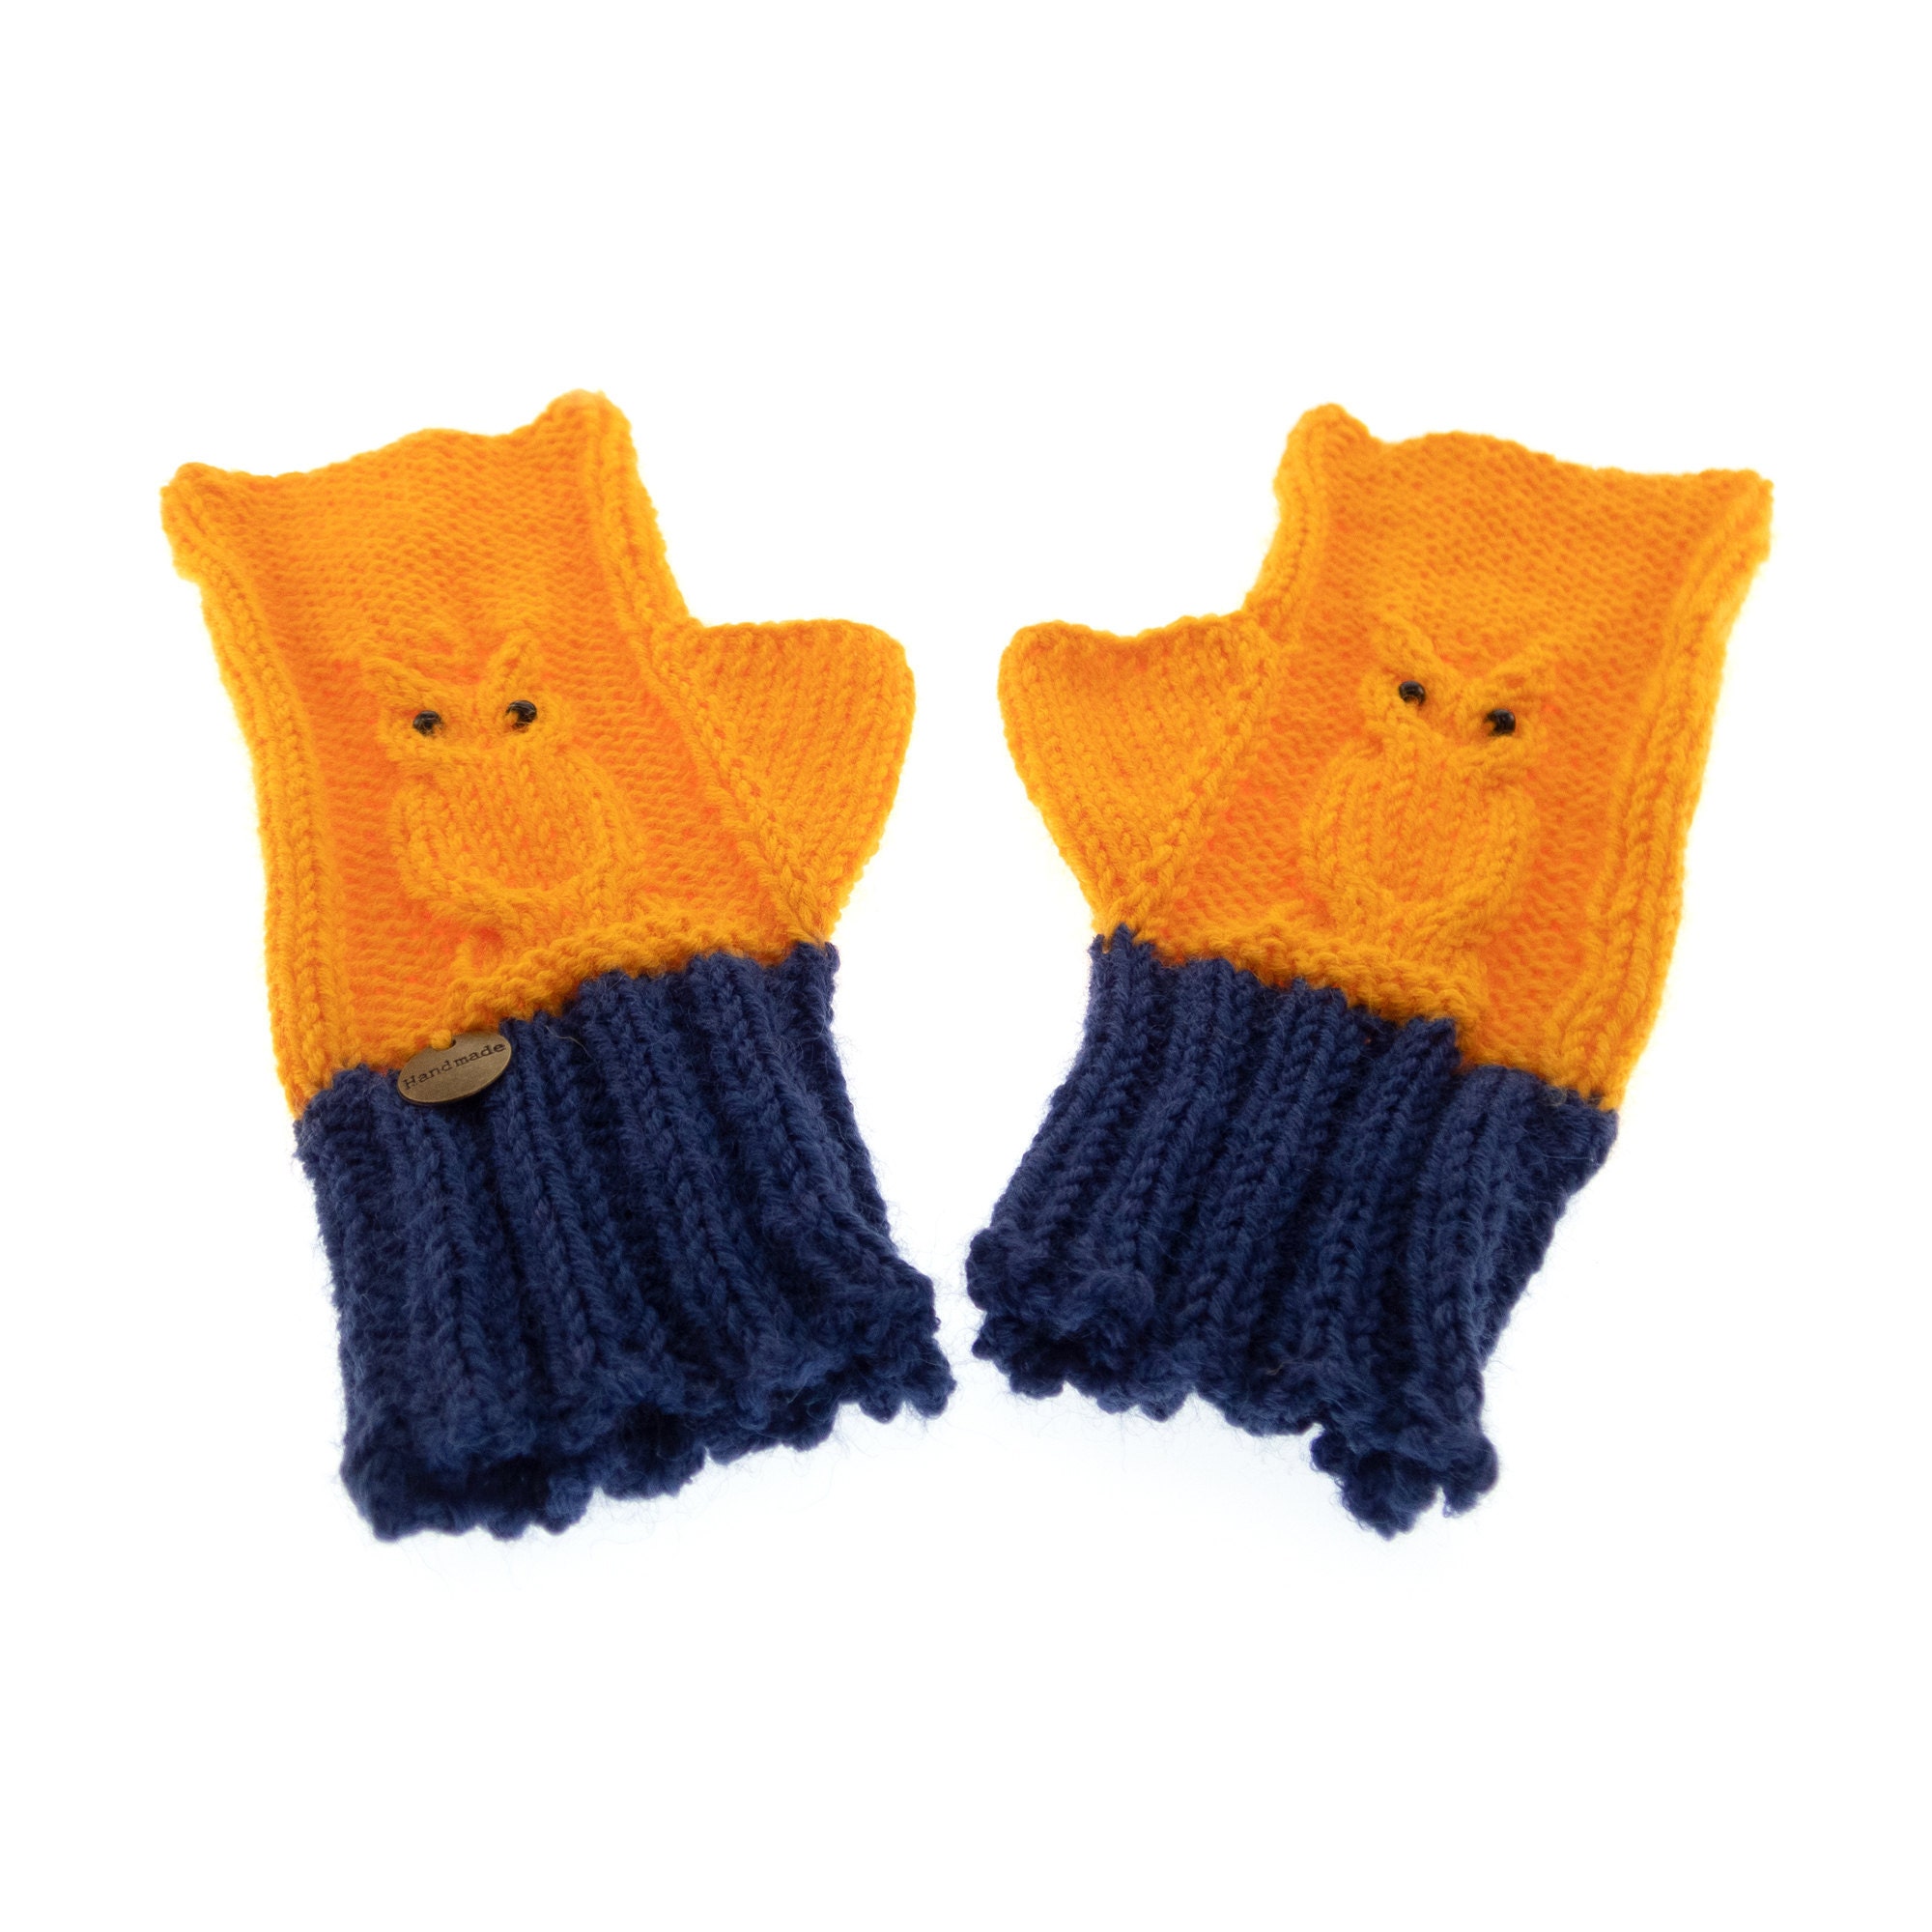 mittens for women fingerless hand gloves with owls